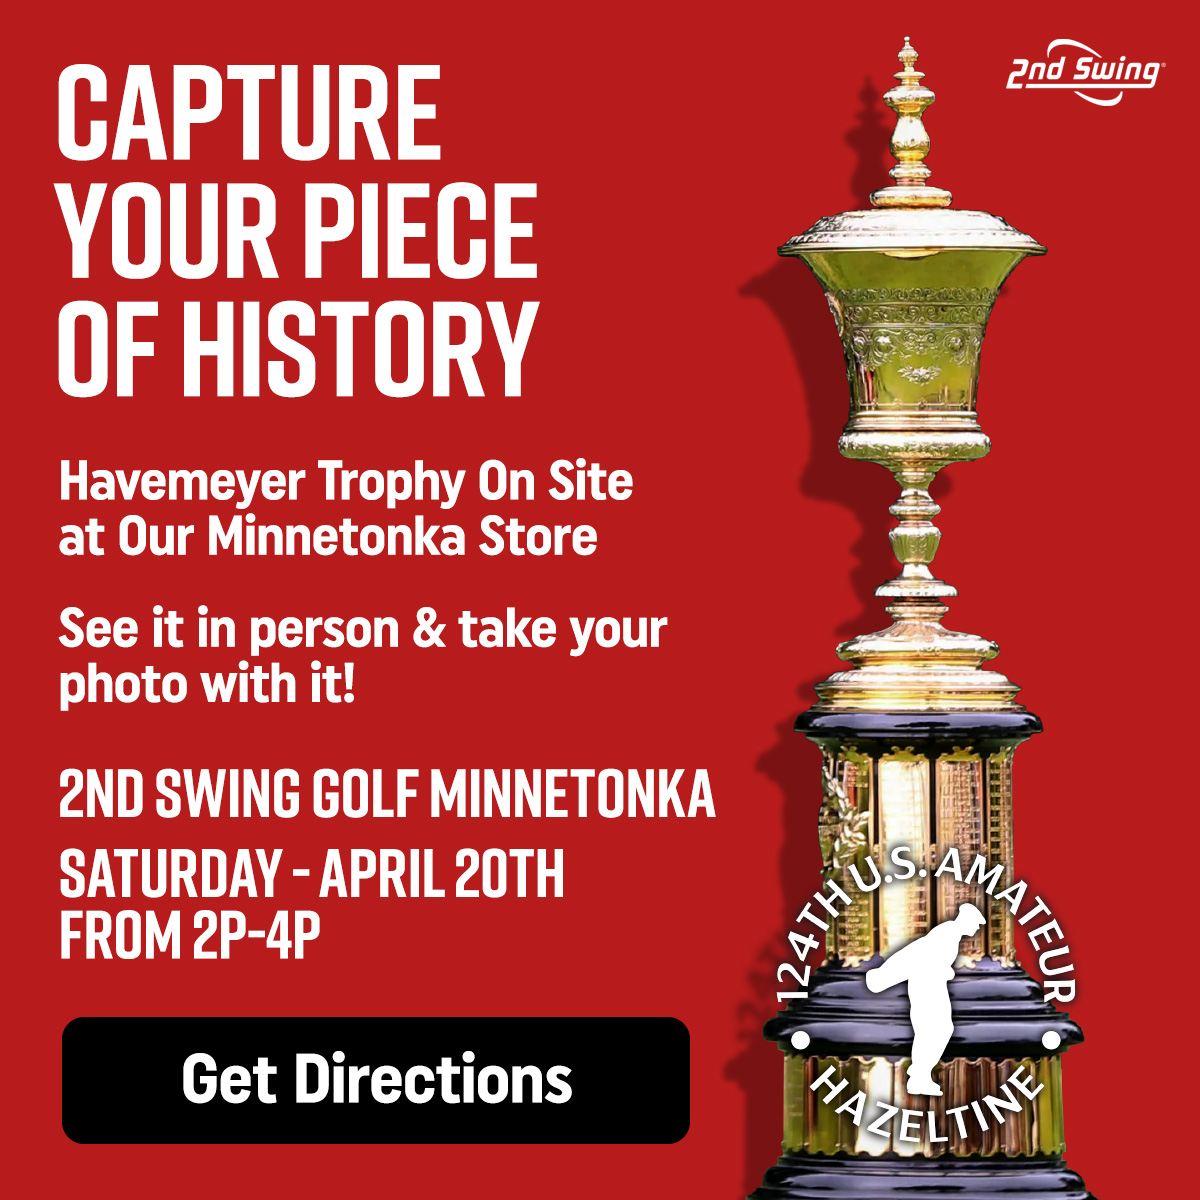 The @USGA U.S. Amateur is coming to @Hazeltine this summer, and look what's coming to our 2nd Swing Minnetonka store this Saturday? ⛳🏆 See who will take home the Havemeyer Trophy this August. Tickets available here: bit.ly/4a94VGN #2ndswinggolf #USAmateur #golf #usga